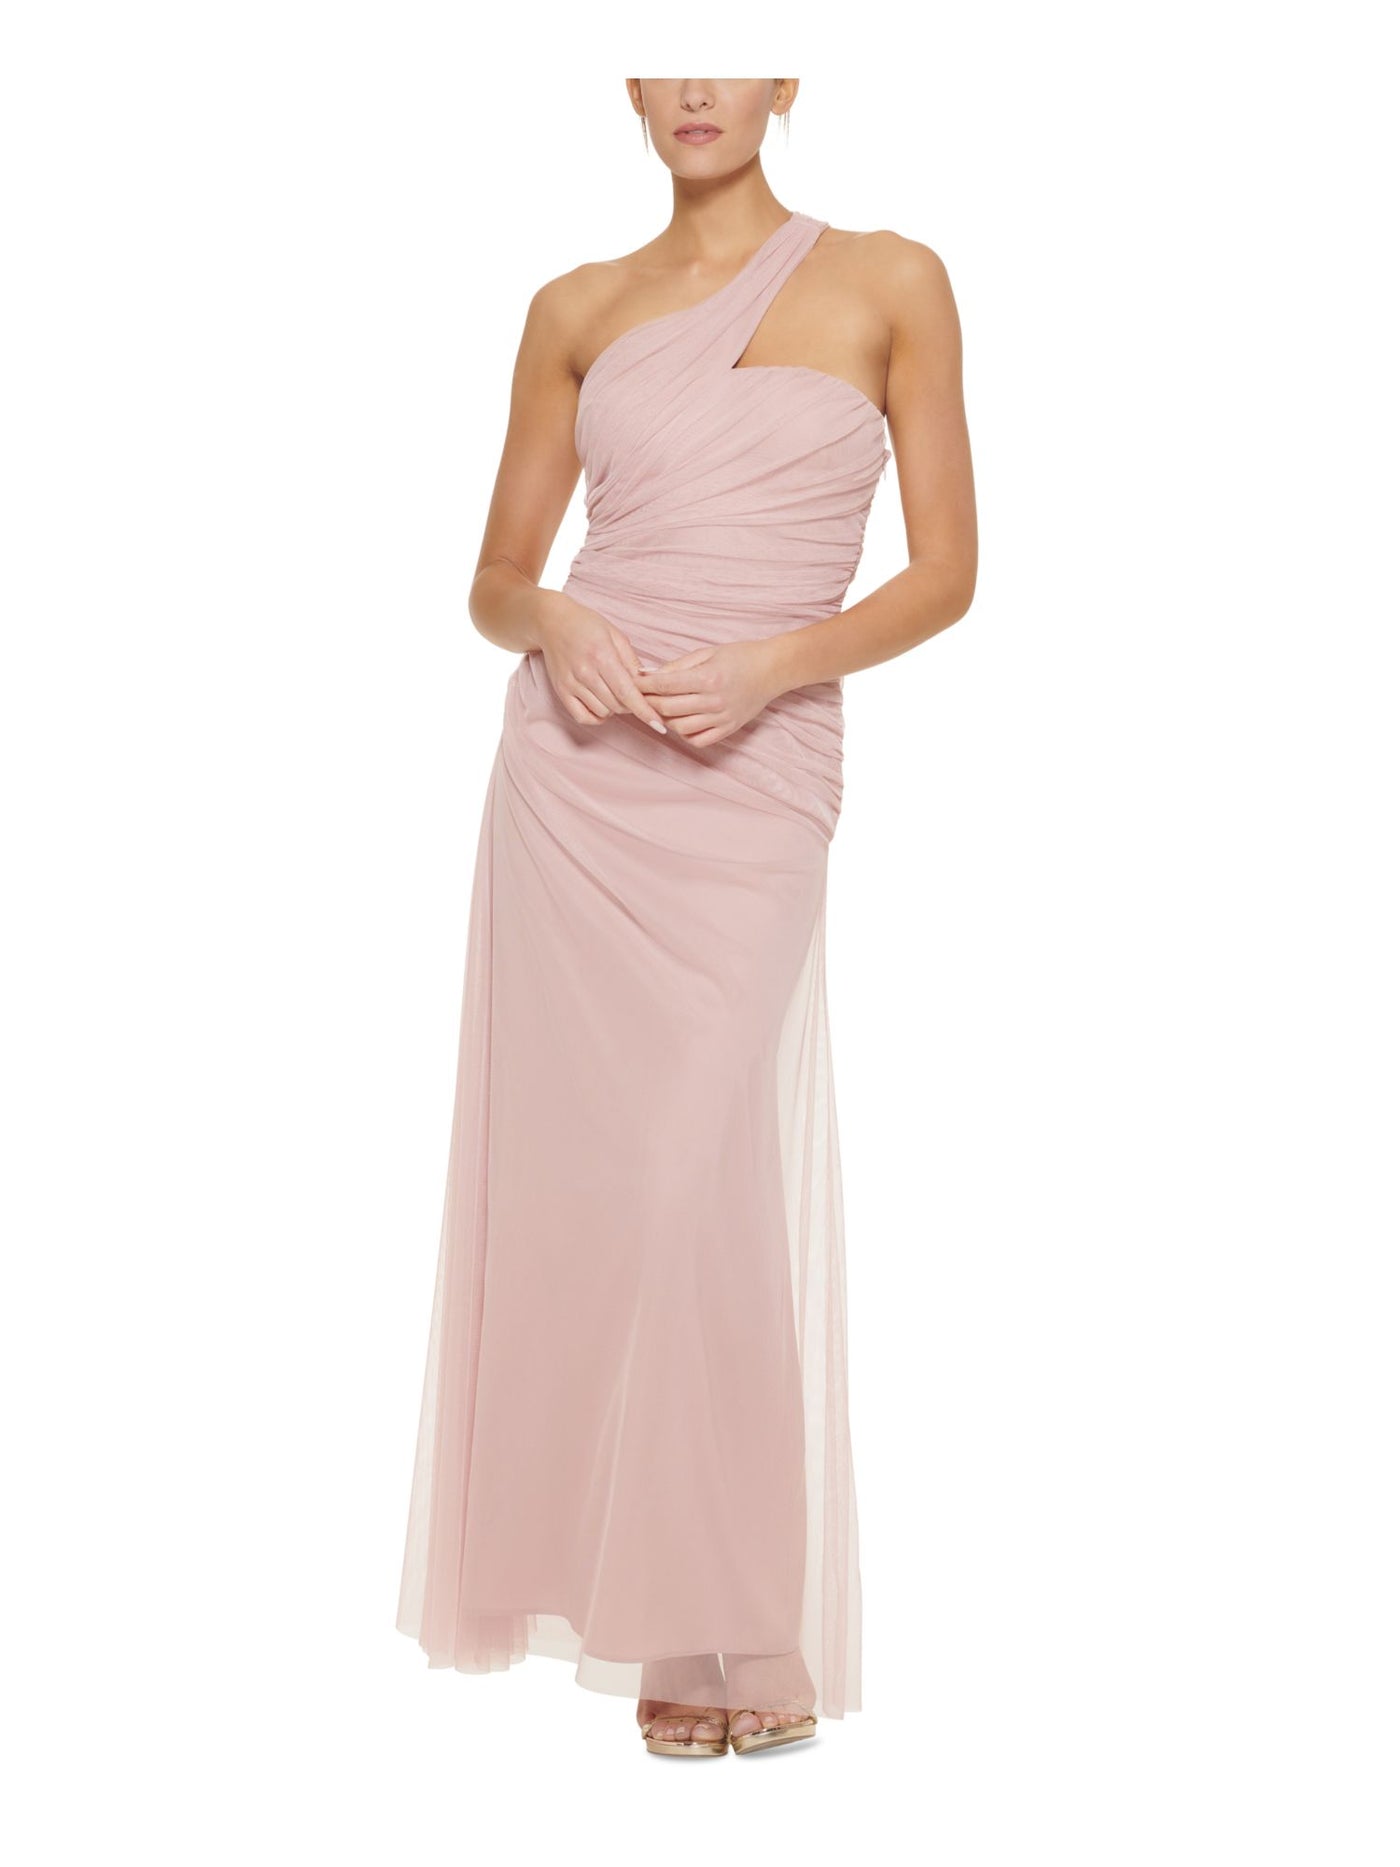 DKNY Womens Pink Cut Out Zippered Ruched Sleeveless Asymmetrical Neckline Full-Length Formal Gown Dress 12